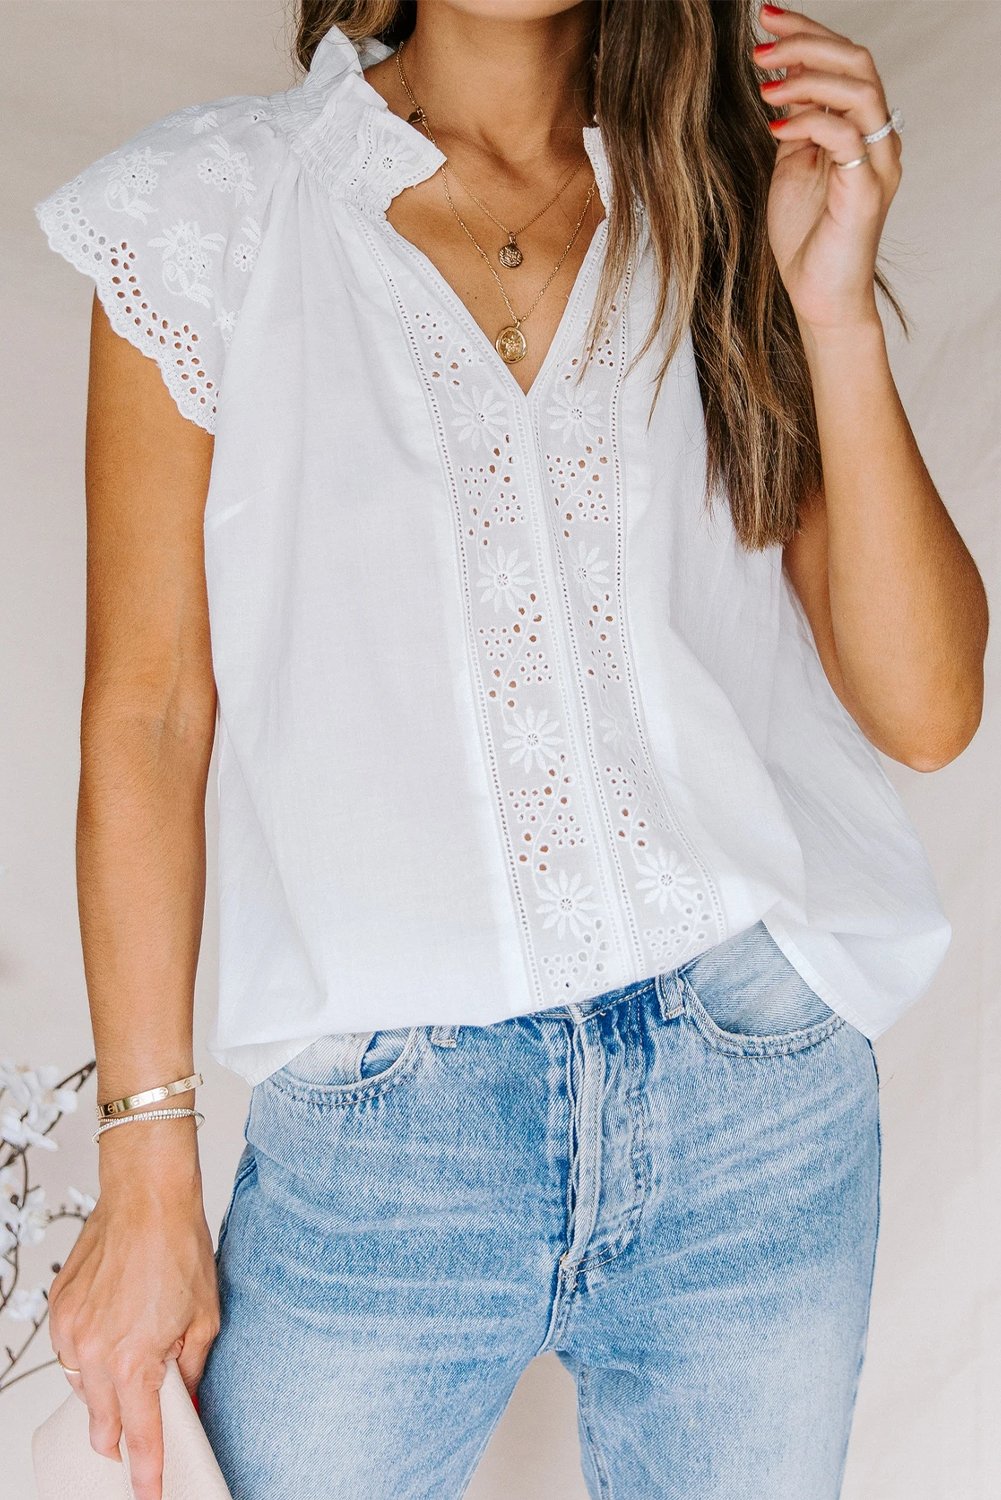 Embroidered Eyelet Cap Sleeves Top Embroidered Eyelet Cap Sleeves Top - M&R CORNER Trendsi